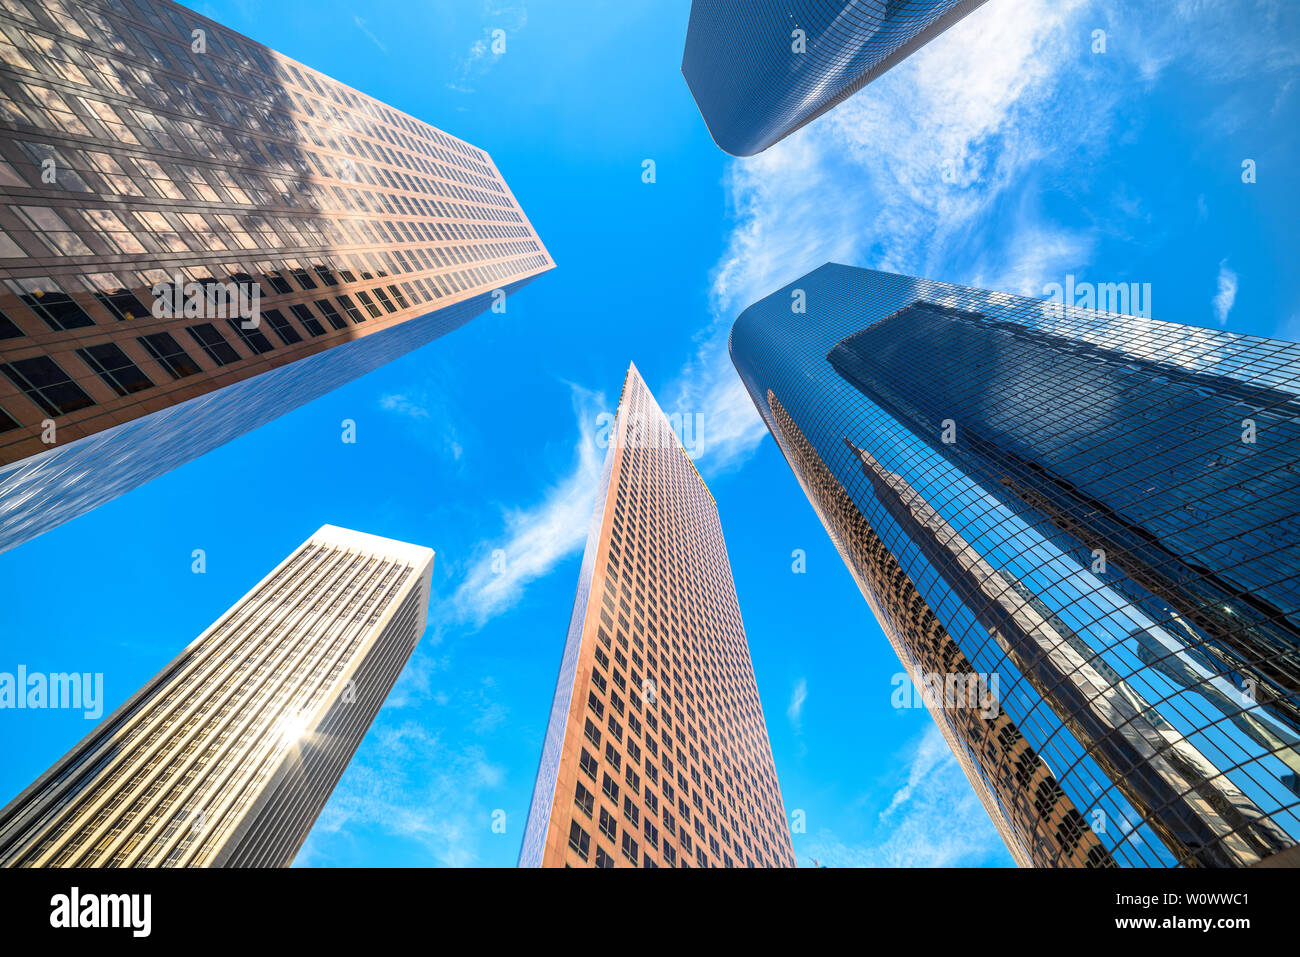 Downtown Los Angeles skyscrapers skyline at sunny day Stock Photo